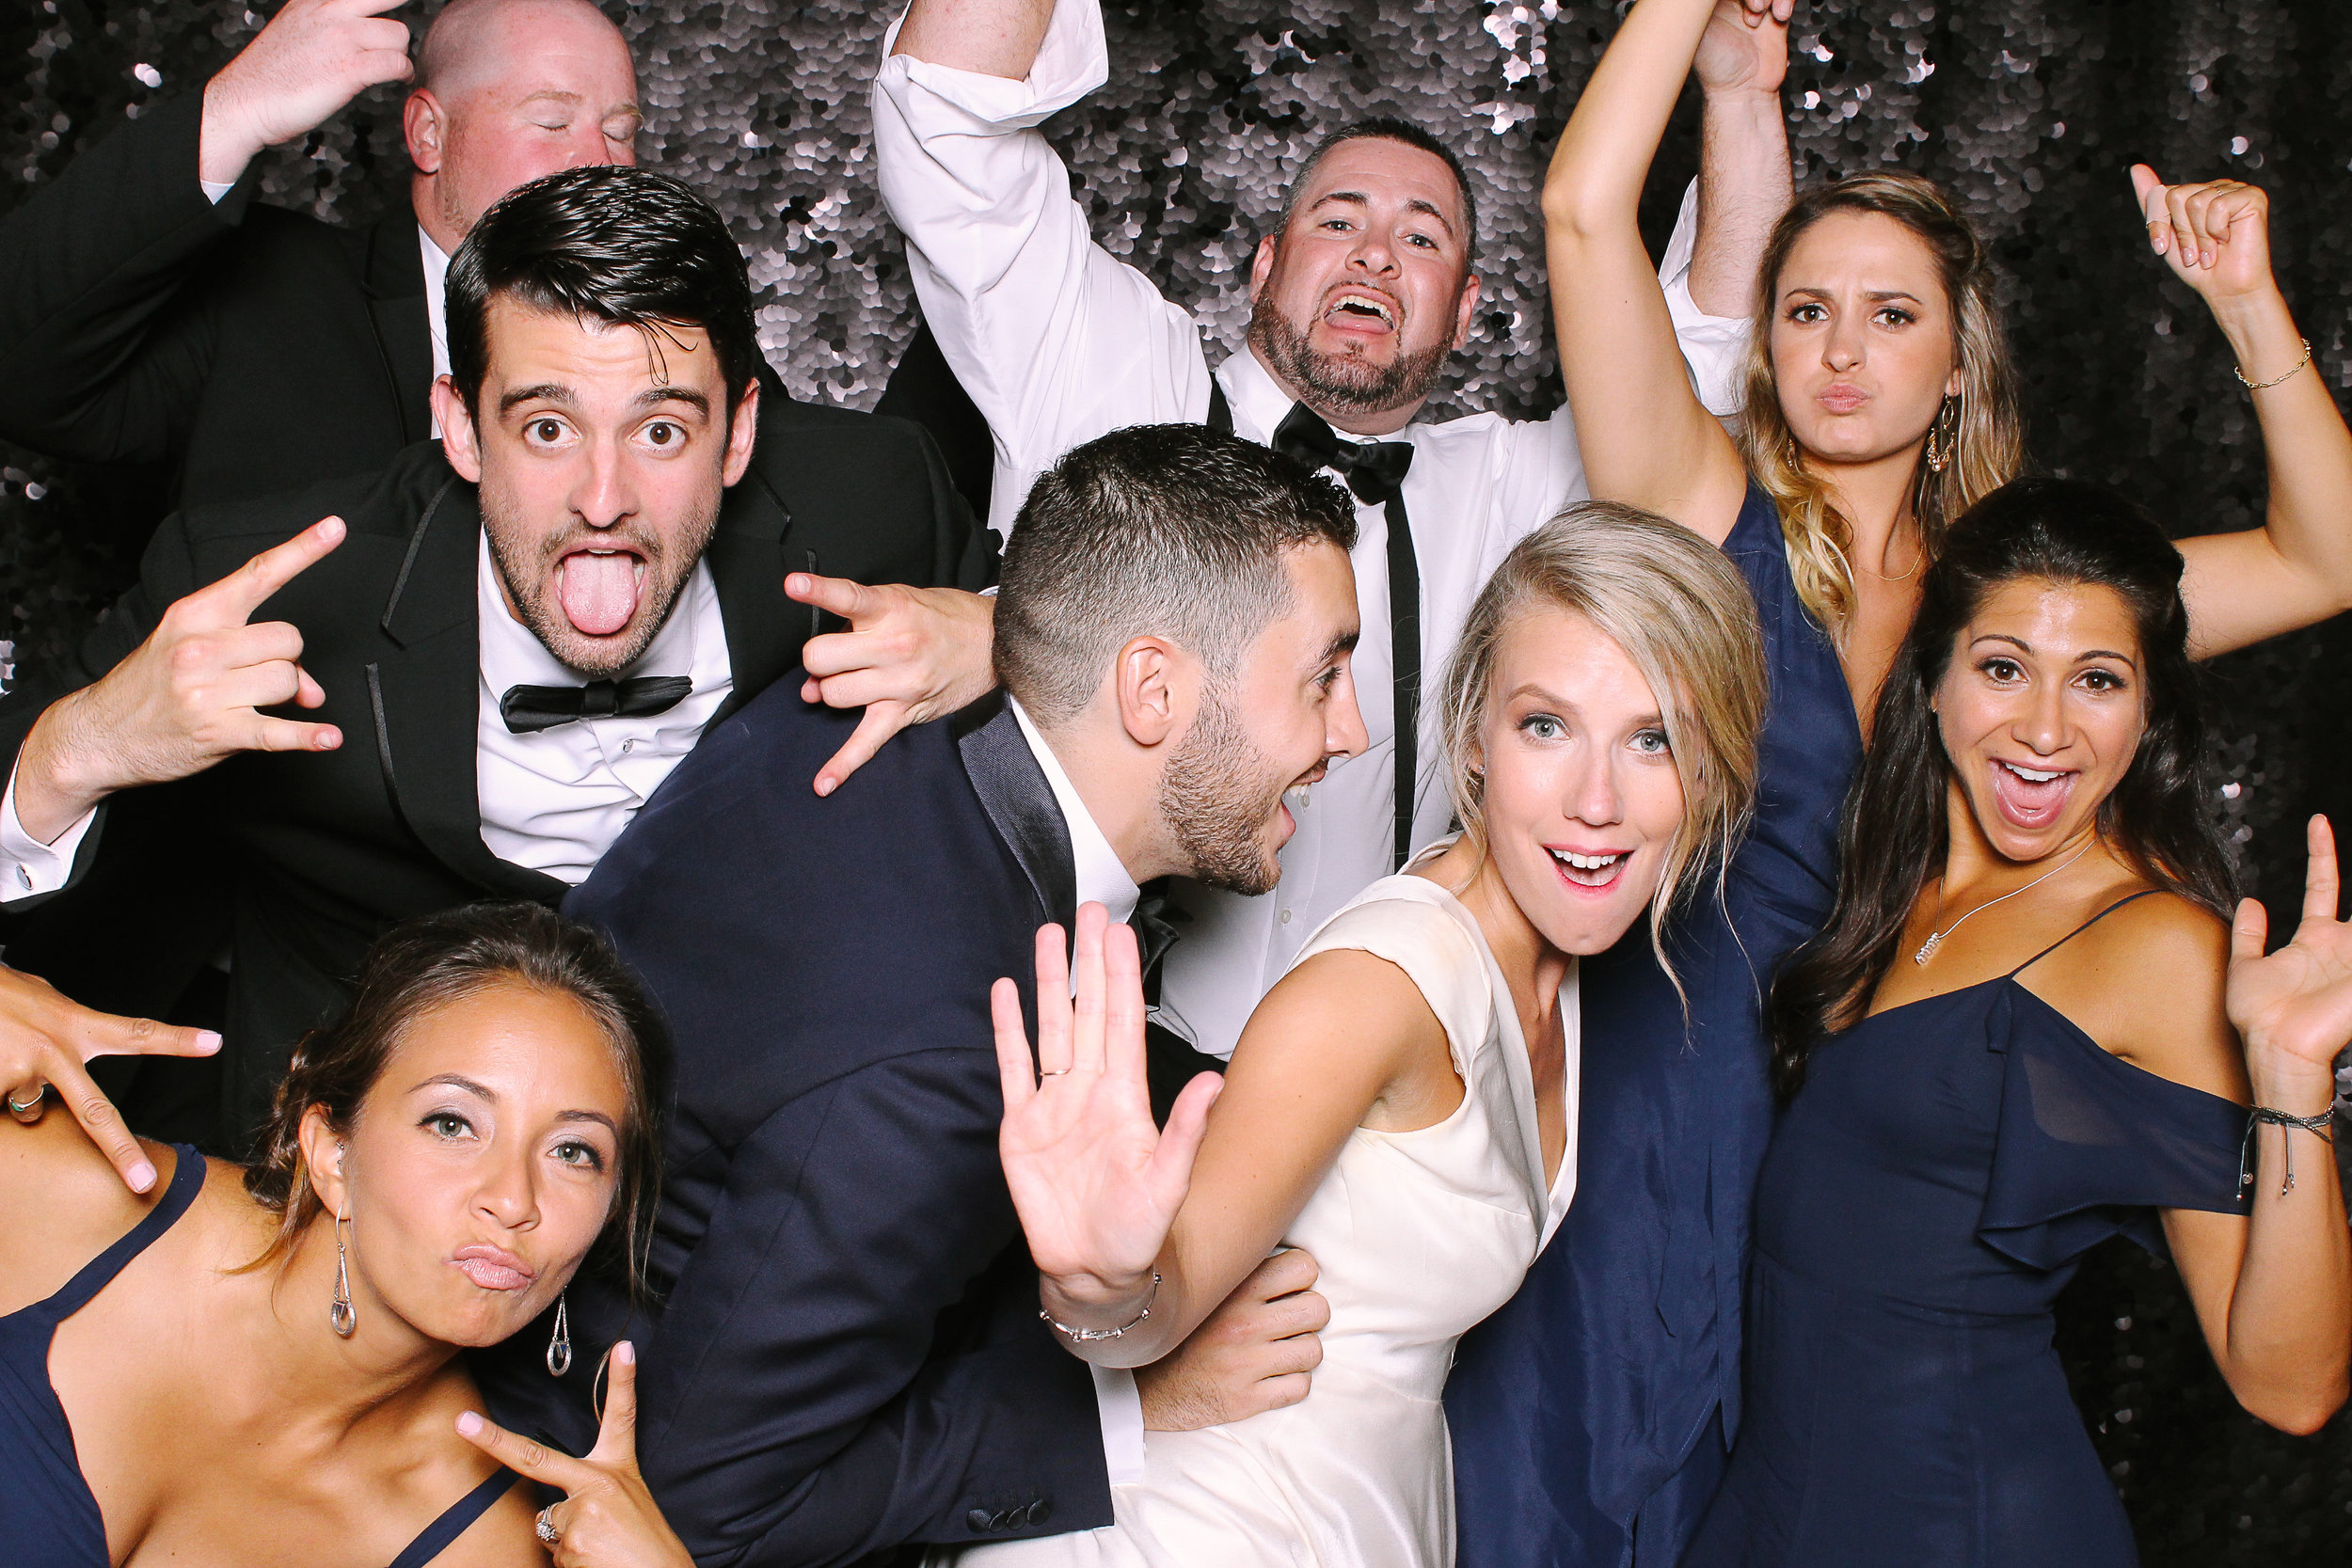 00006-Best Cleveland Photobooth Company Crawford Museum -20160813.jpg